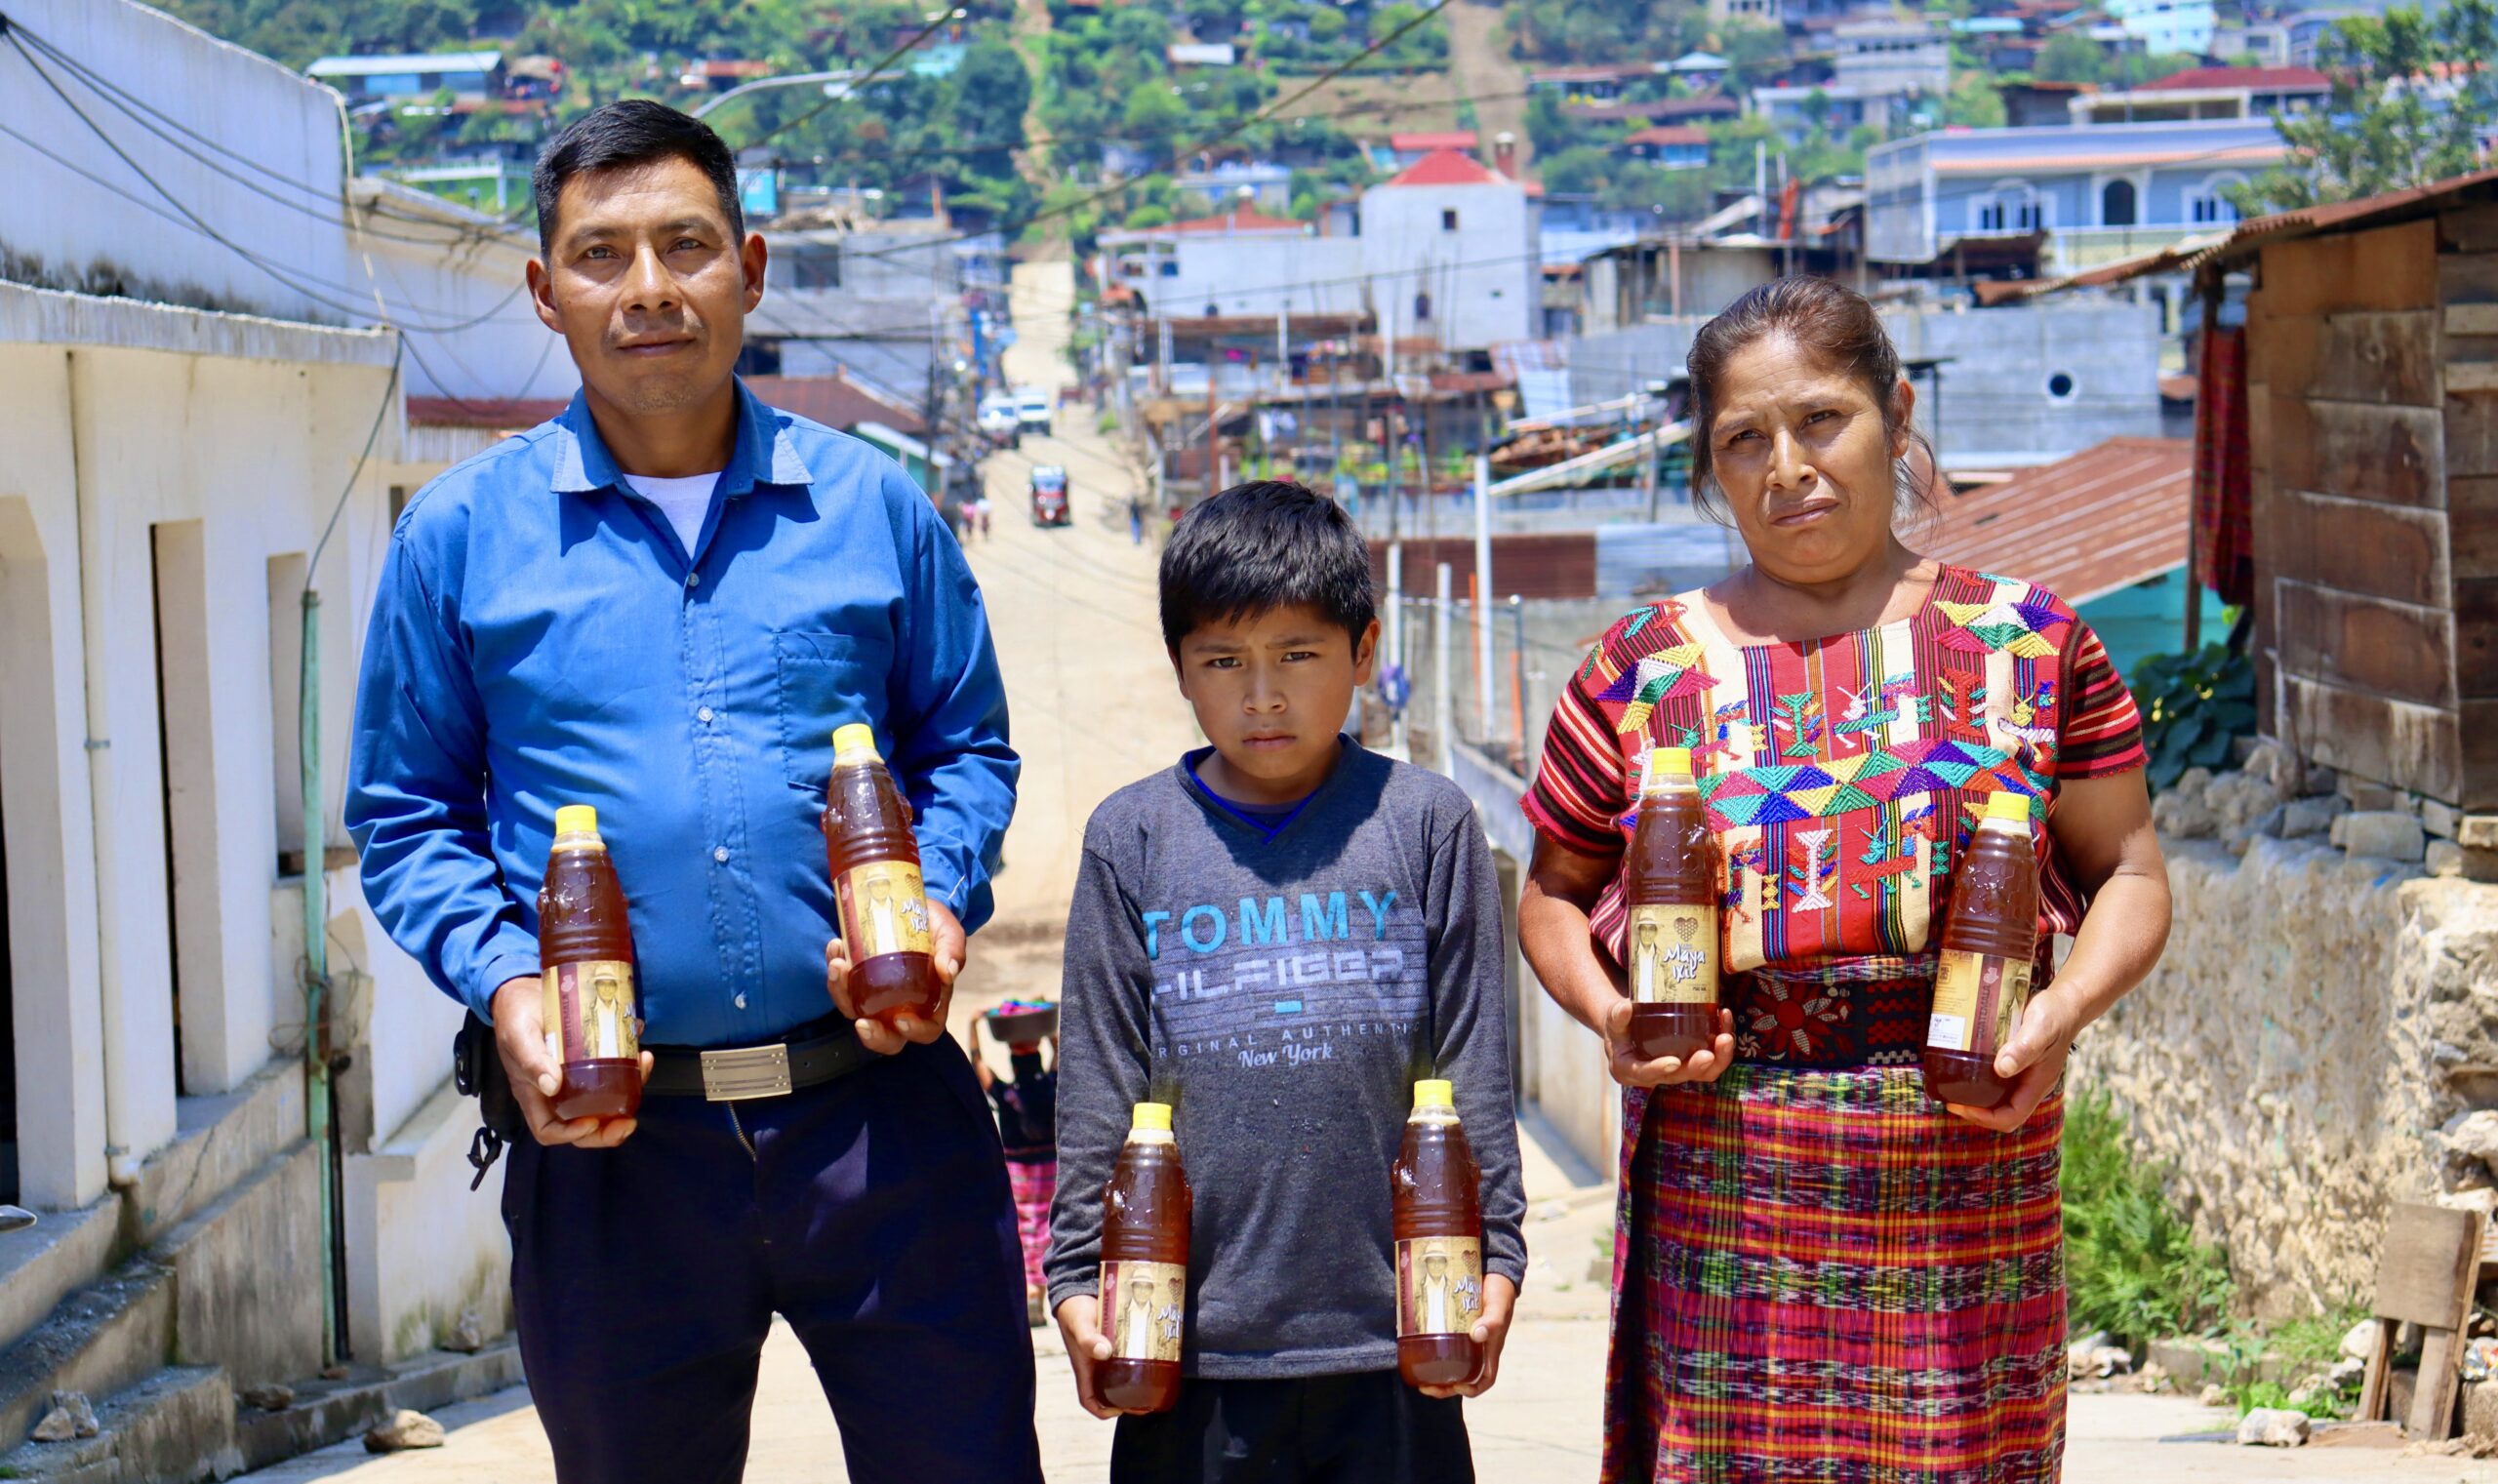 The Otsuma family, members of the Maya Ixil coffee co-op, proudly displaying the honey they produced, which provides crucial supplemental income during the "thin months" of food insecurity.